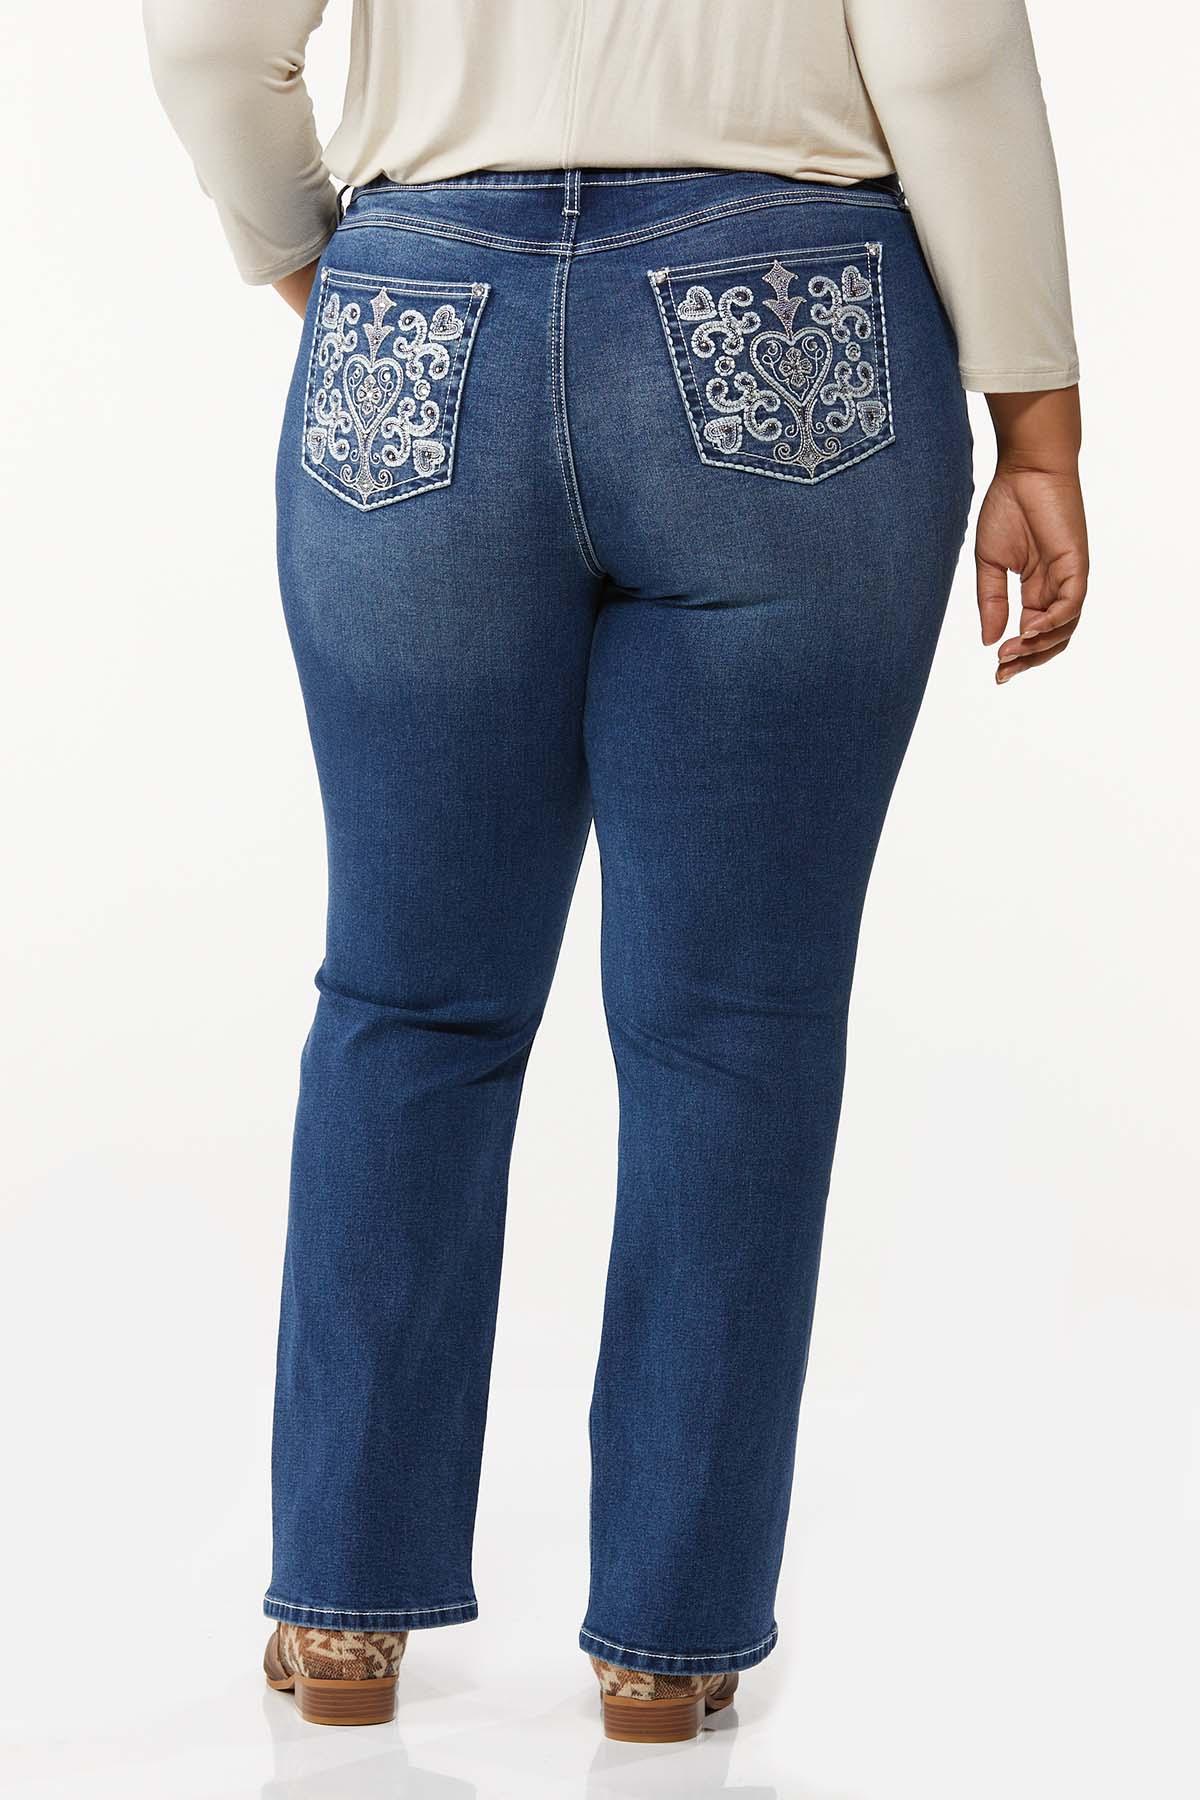 Plus Size Heart Embroidered Jeans